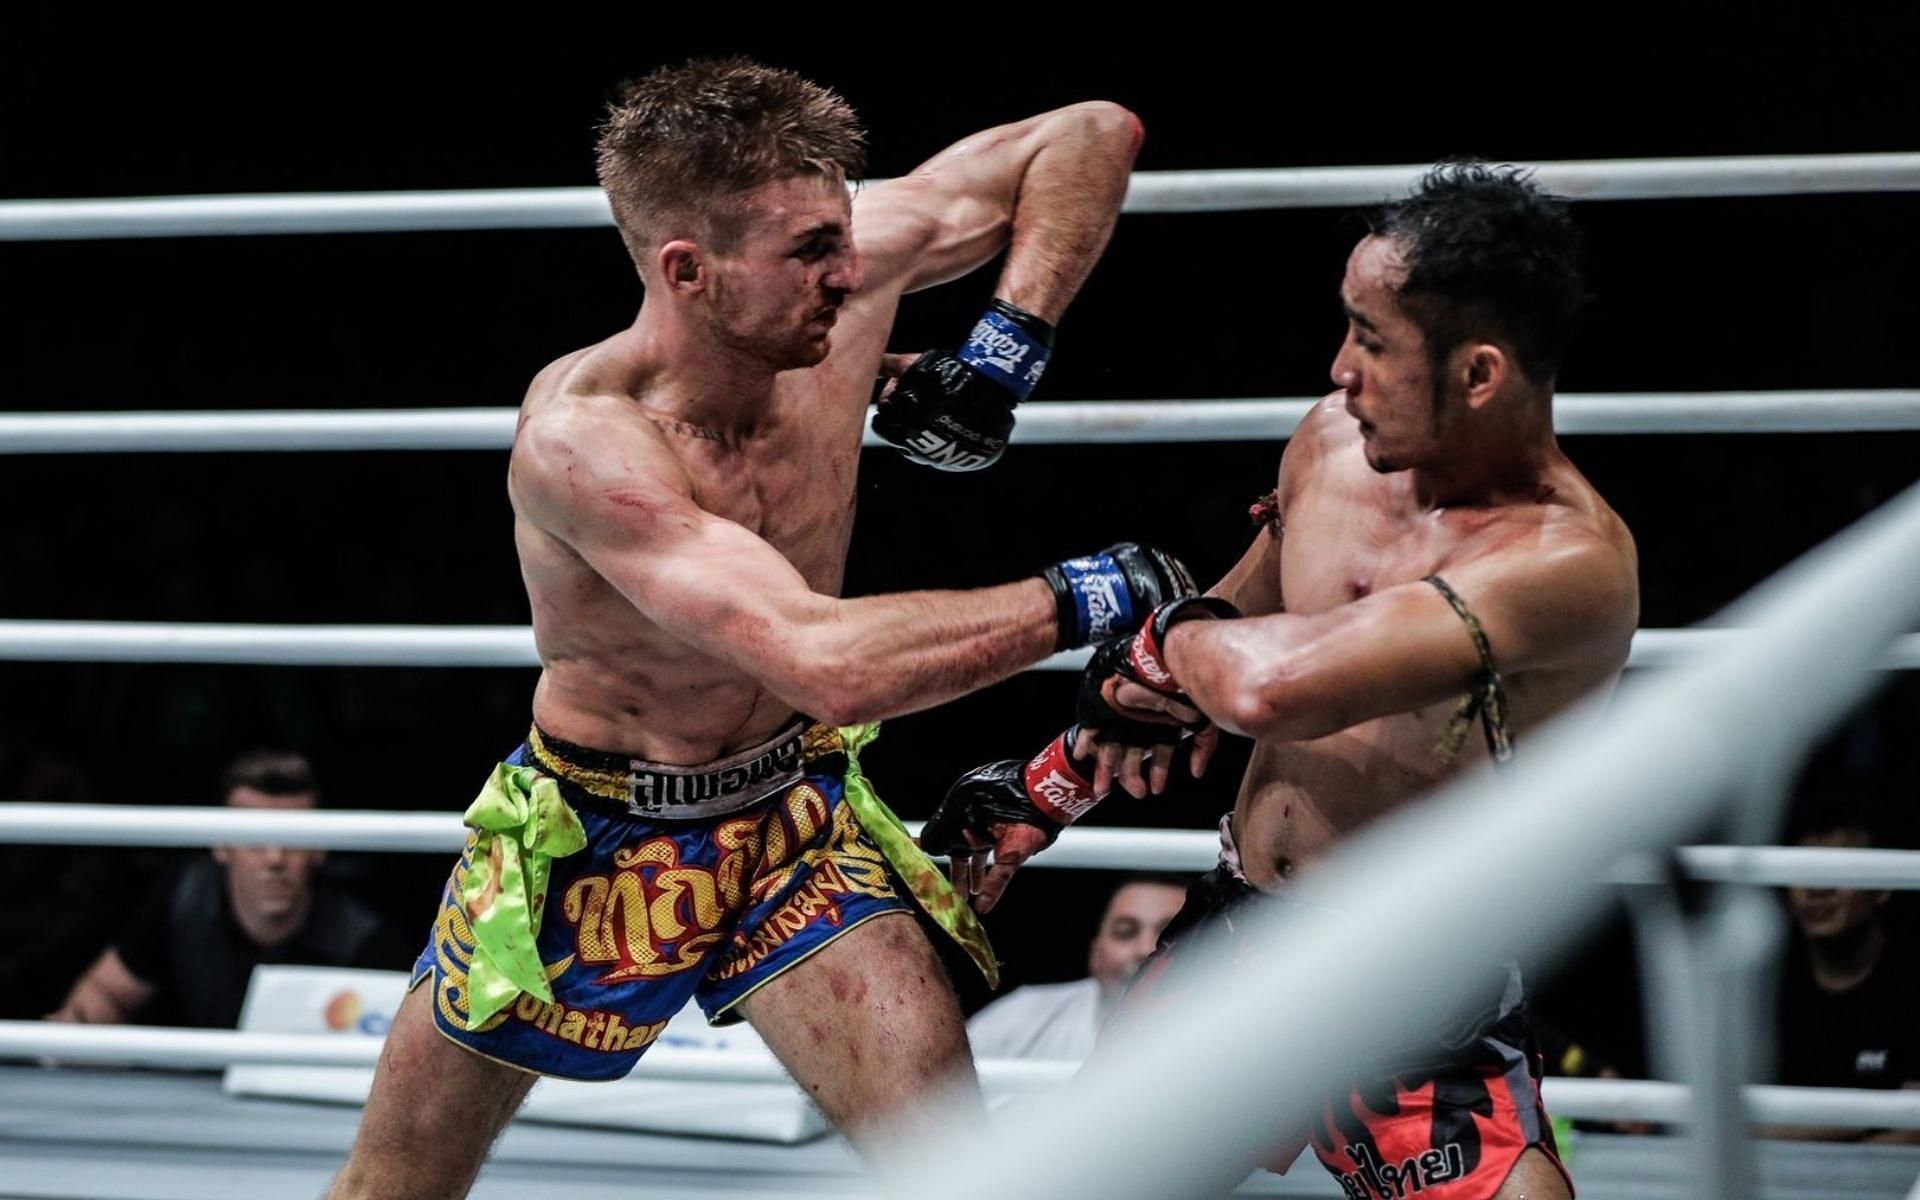 The ONE Championship Muay Thai title bout between Jonathan Haggerty (left) and Sam-A Gaiyanghadao (right) was a war for the ages. (Image courtesy of ONE Championship)